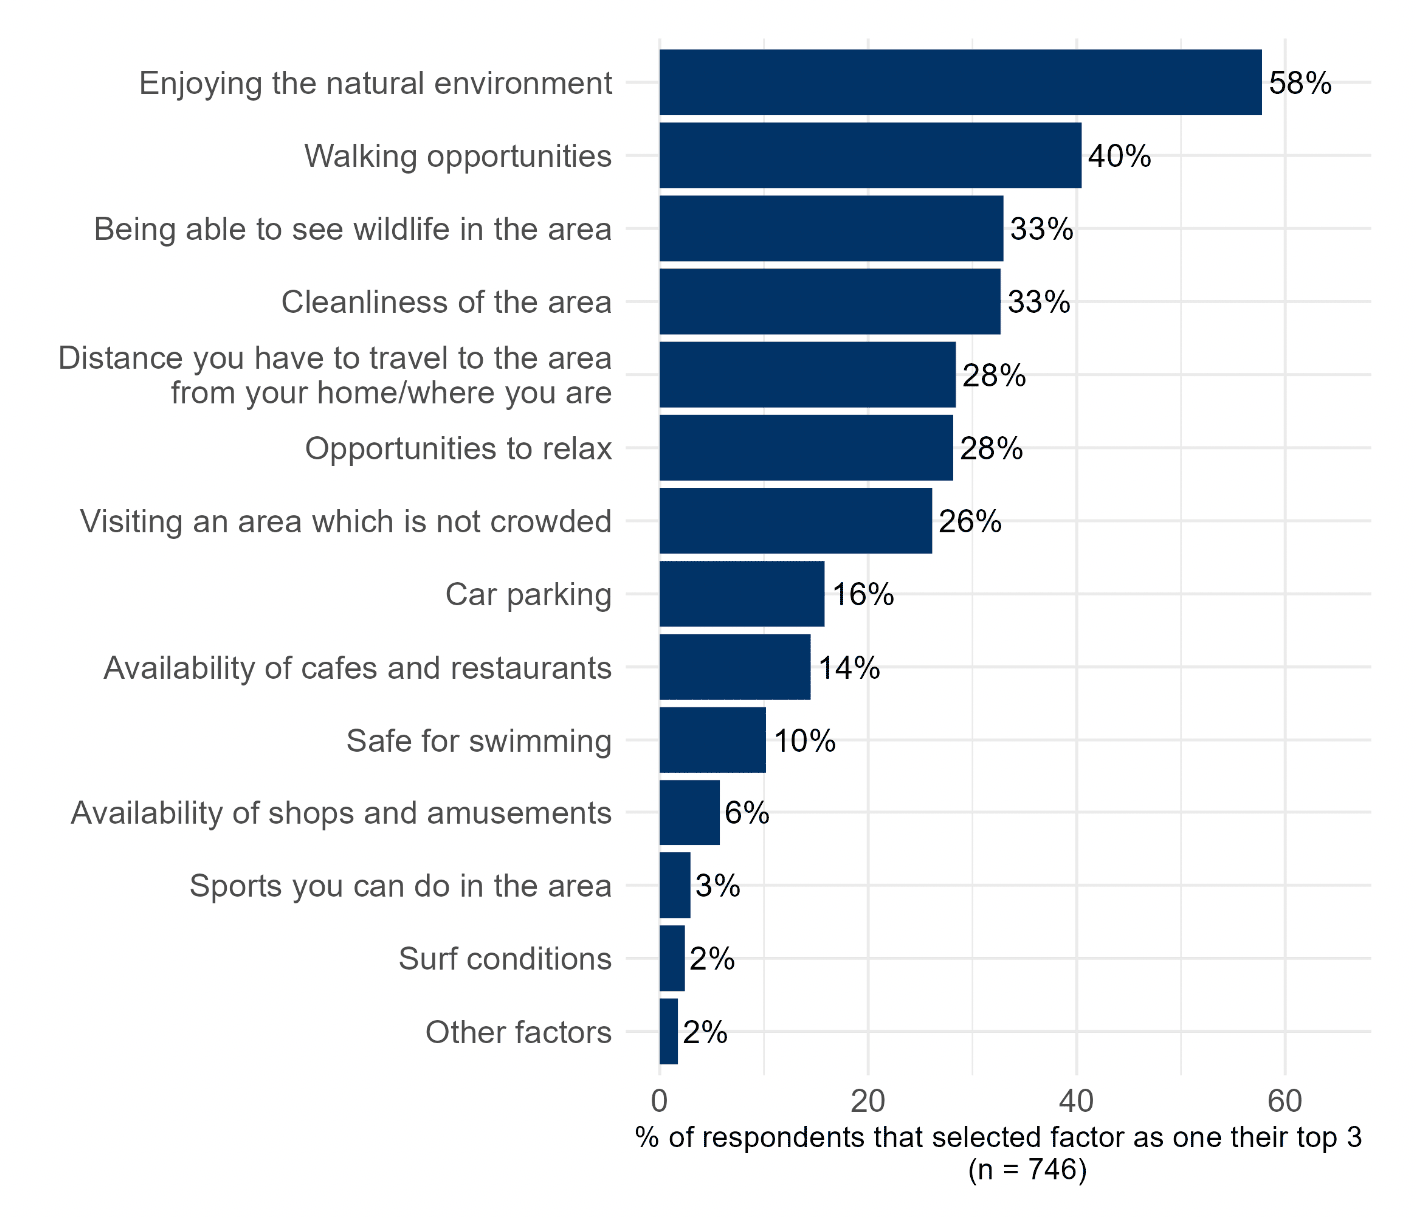 Bar chart showing that 'enjoying the natural environment', 'walking opportunities' and 'being able to see wildlife in the area' were the most common factors (respectively) that respondents citied in their top 3 factors when deciding which Scottish marine and coastal areas to visit.